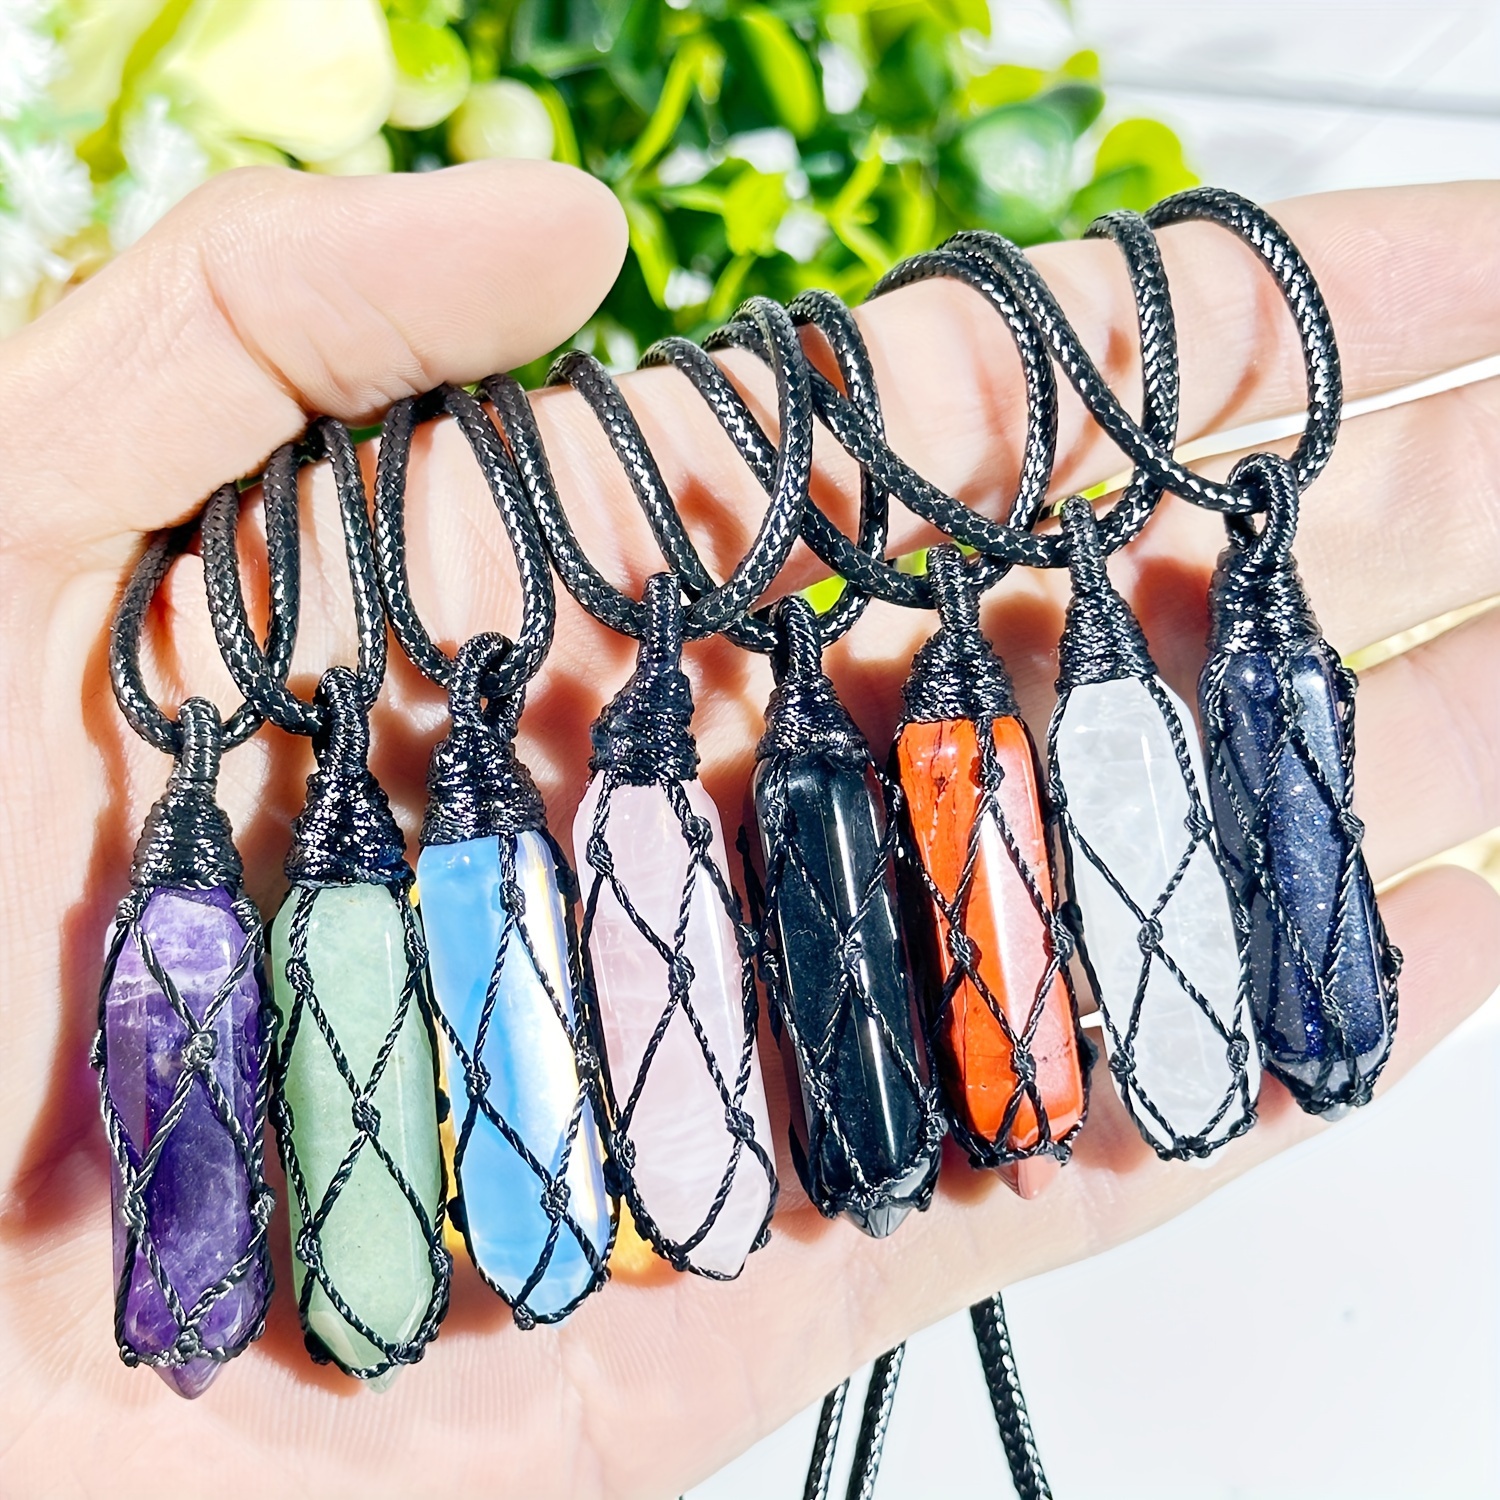 SAOYOAS Crystal Necklace Holder, Necklaces Cage Cords for Crystals